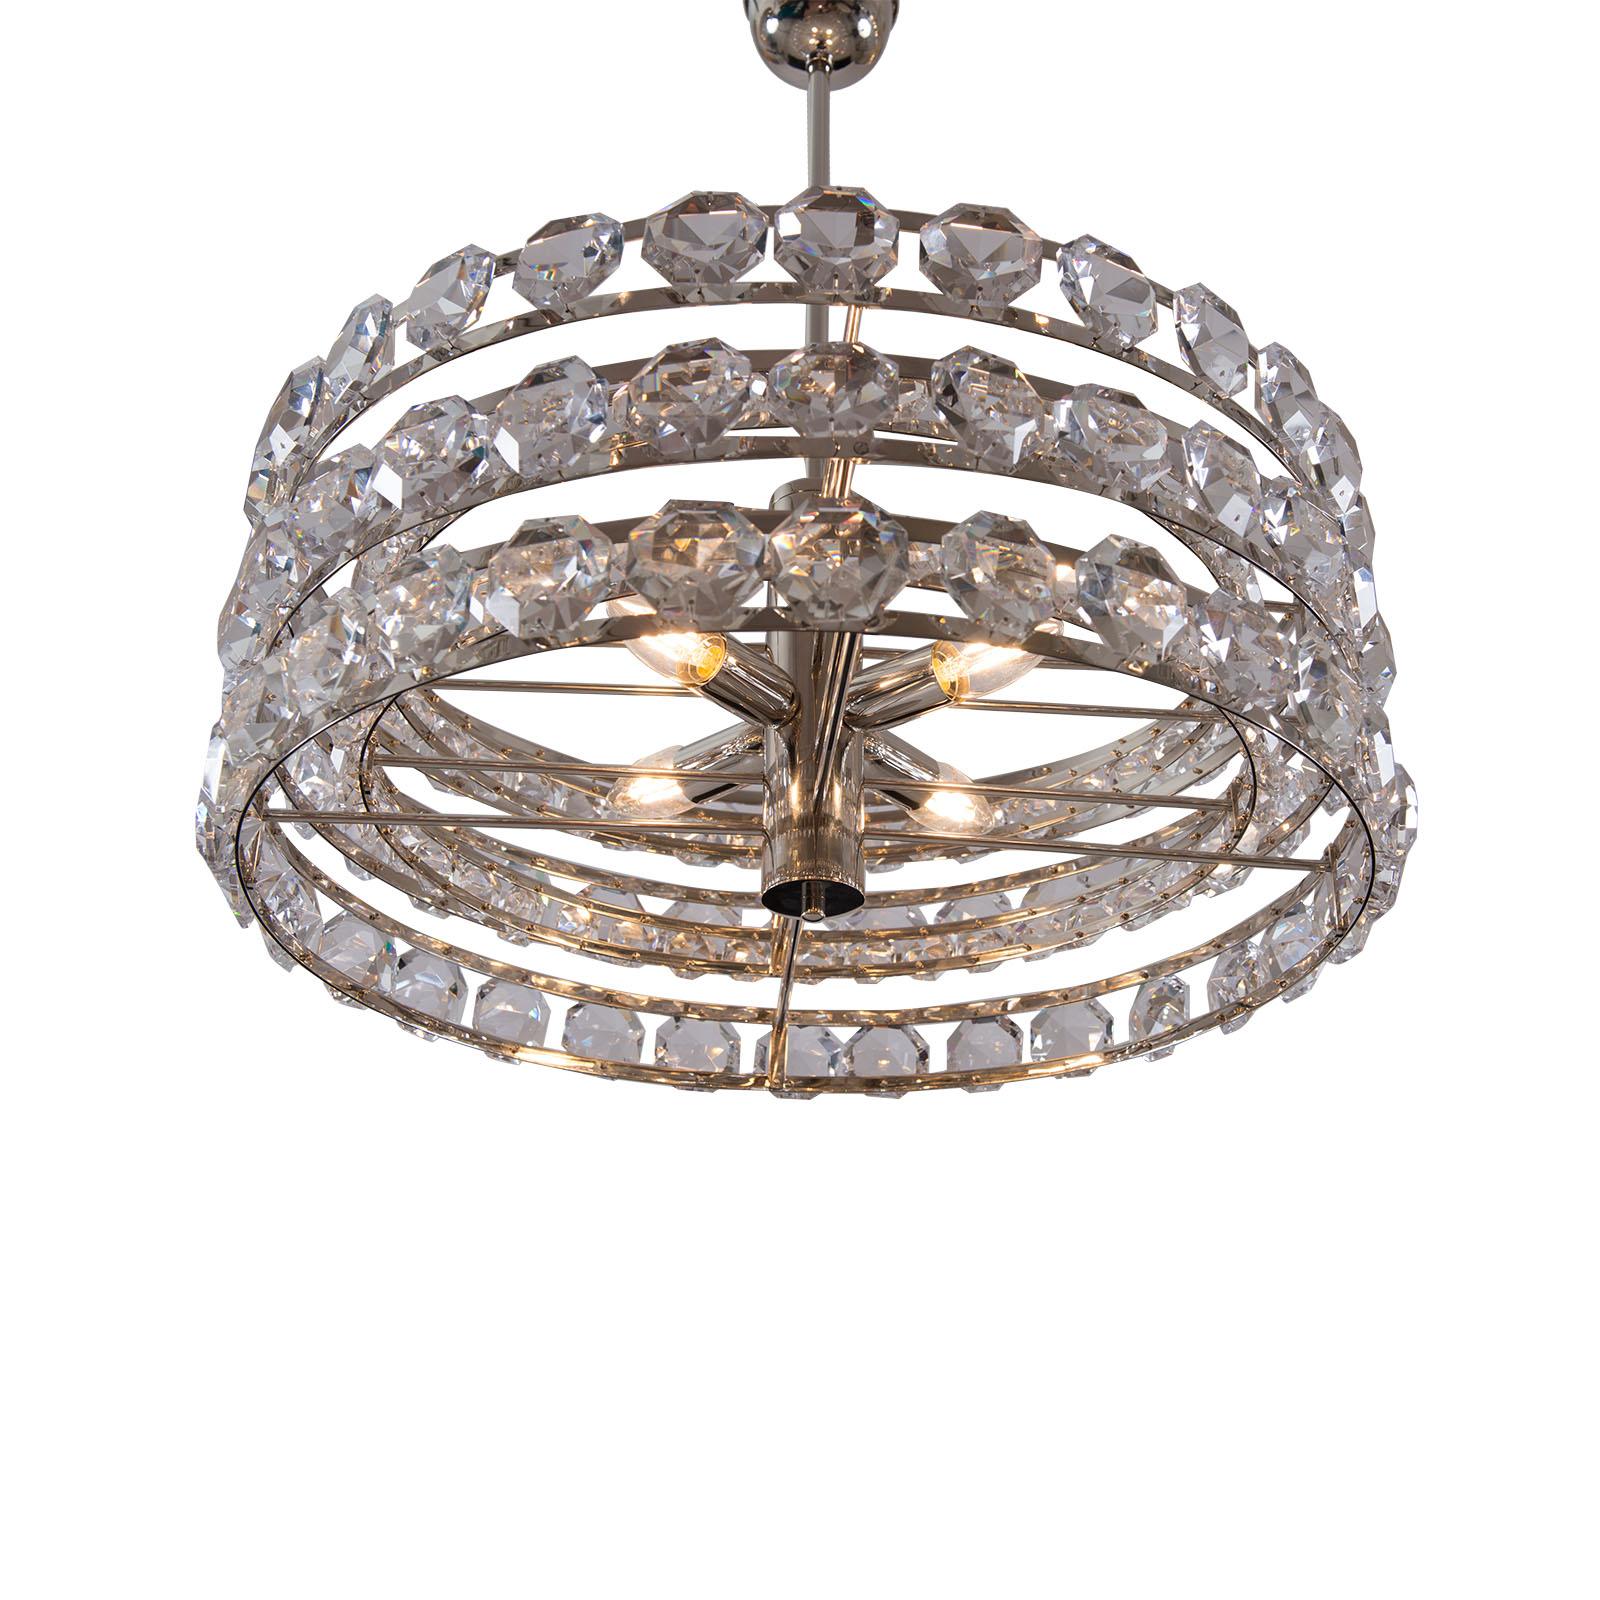 Hand-Crafted Mid-Century Modern Style Crystal Chandelier, Re Edition For Sale